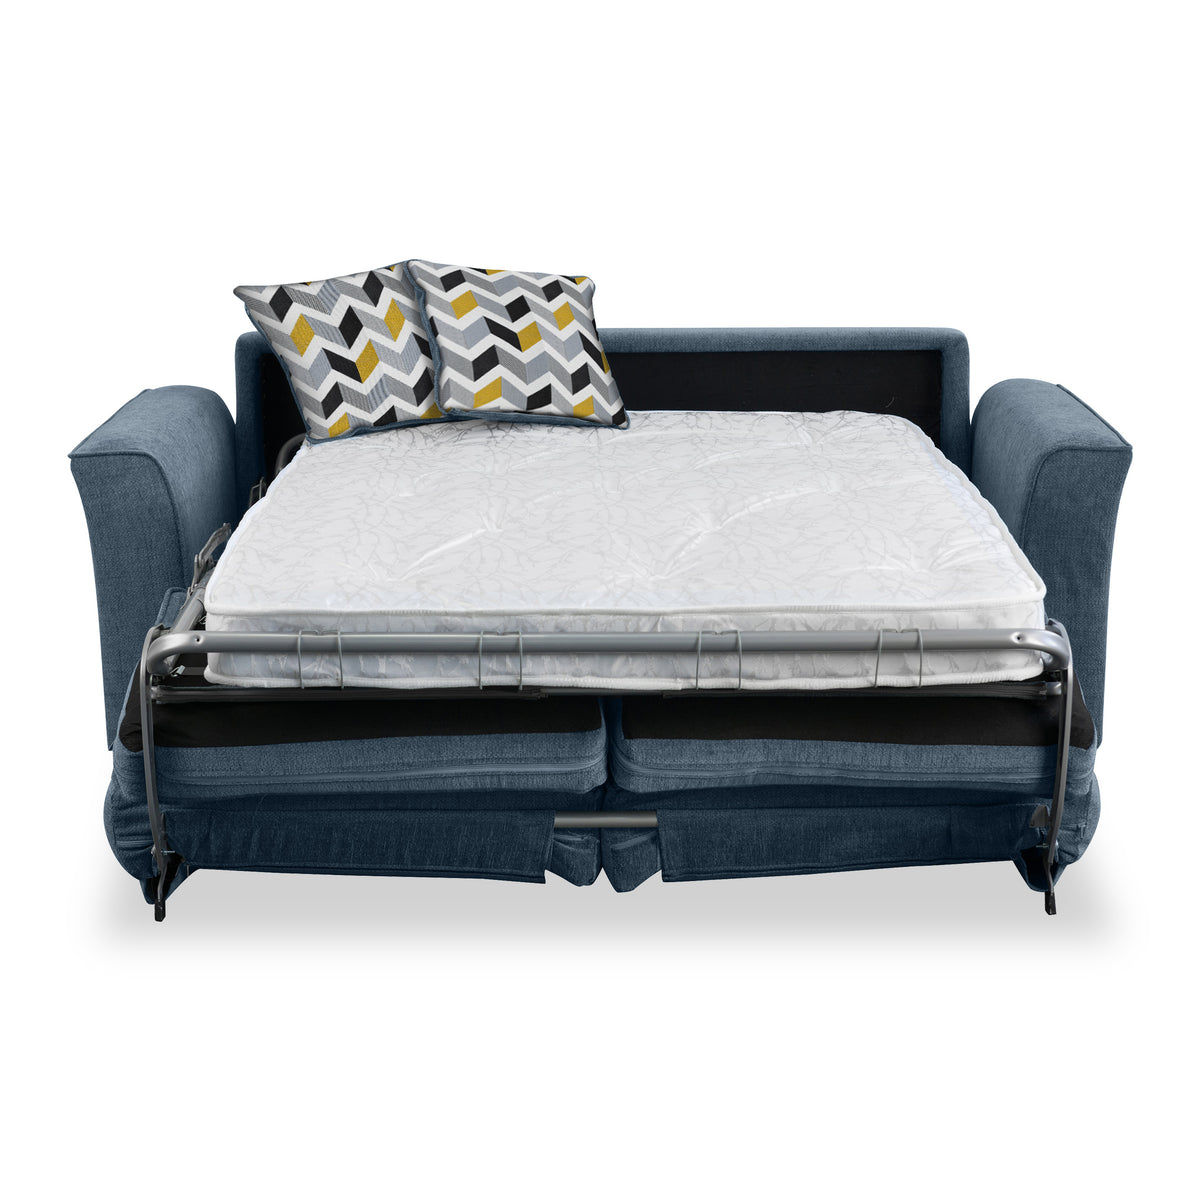 Boston 2 Seater Sofabed in Midnight with Morelisa Mustard Cushions by Roseland Furniture